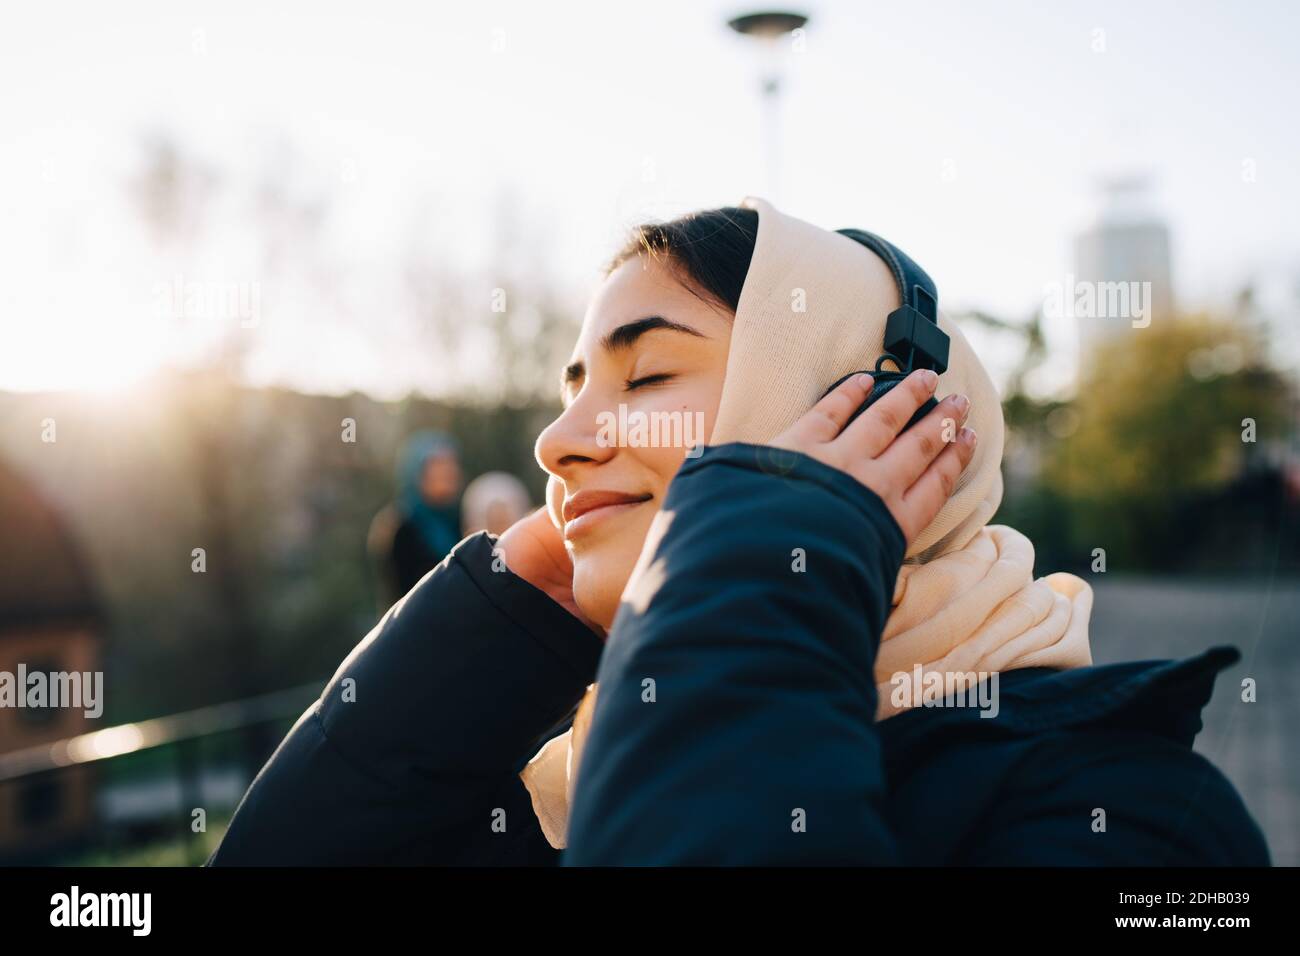 Teenage girl listening to headphones with eyes closed against sky Stock Photo